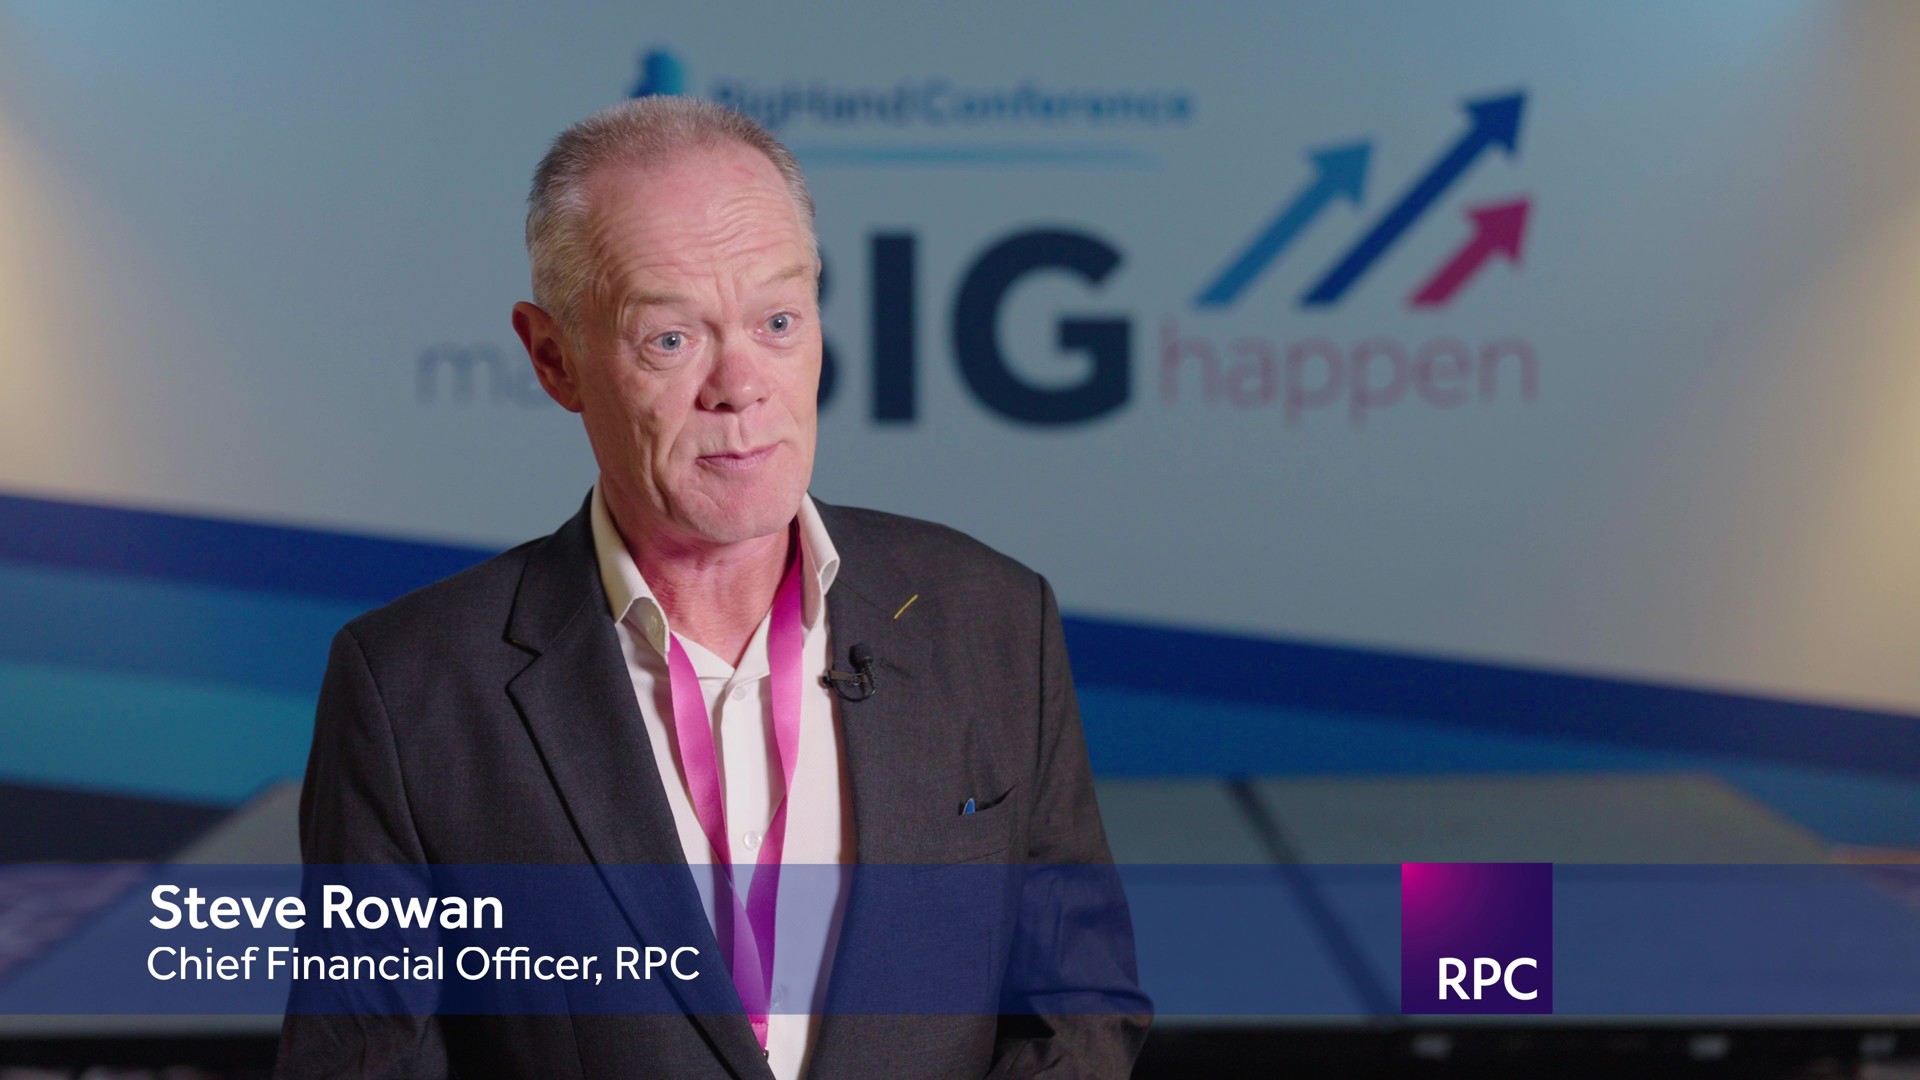 Client Testimonial - Business Intelligence - RPC